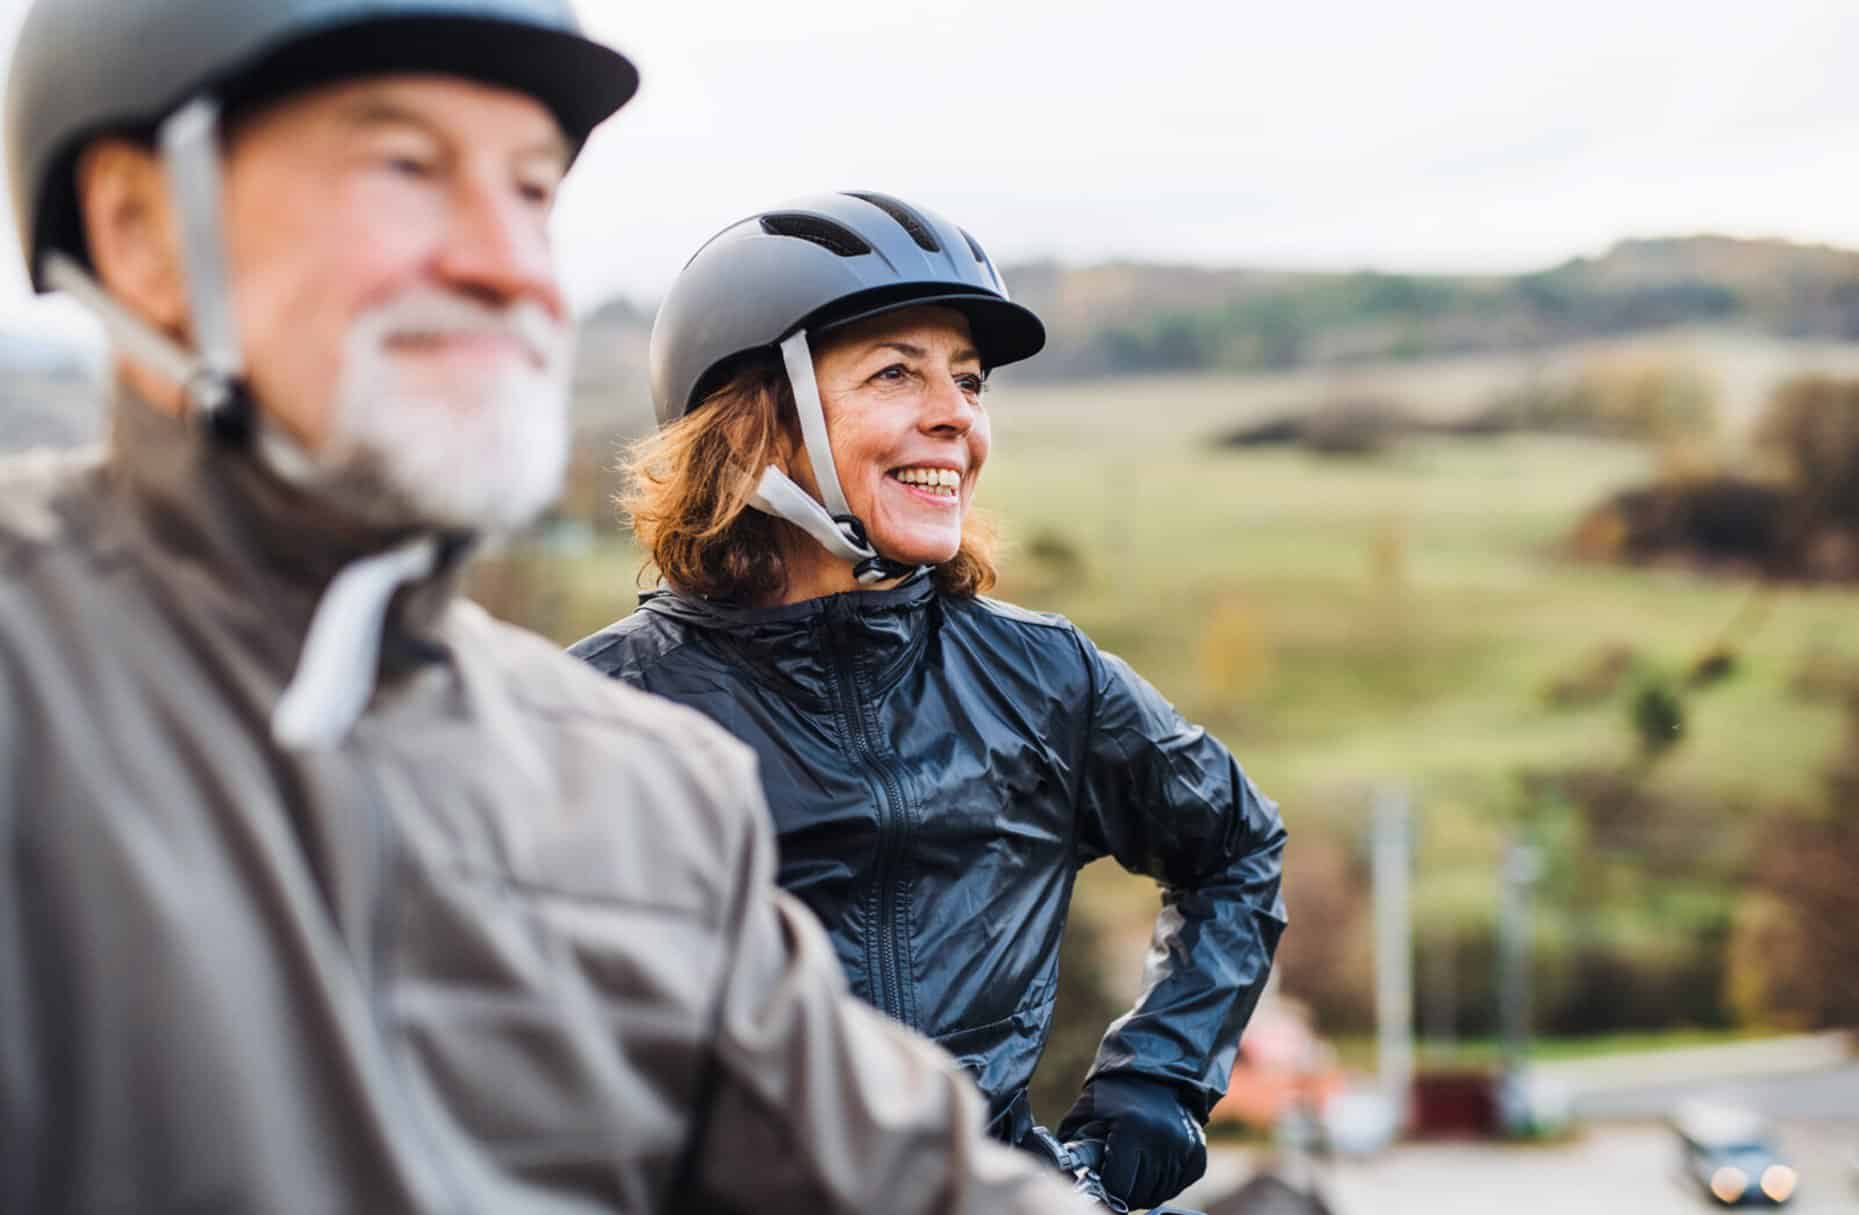 An older couple wearing bicycle helmets are looking into the distance, smiling